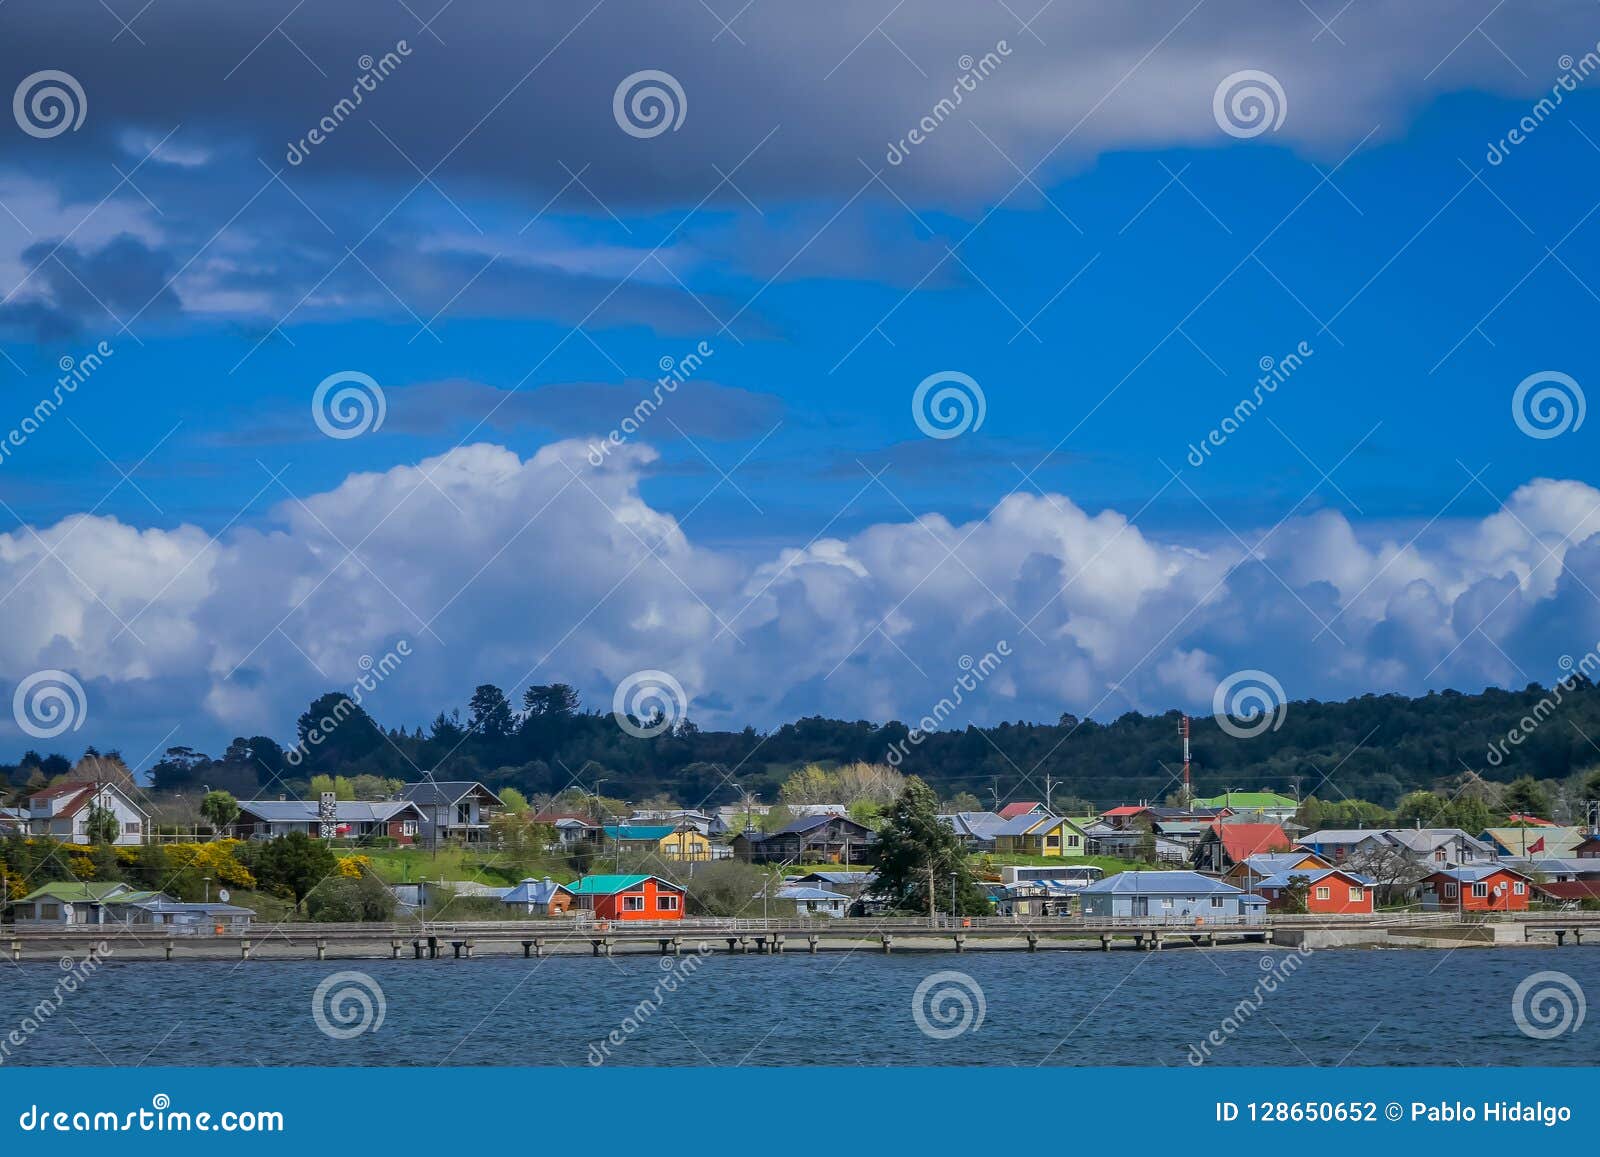 beautiful outdoor view of buildings in the horizont of chacao in chilean mainland